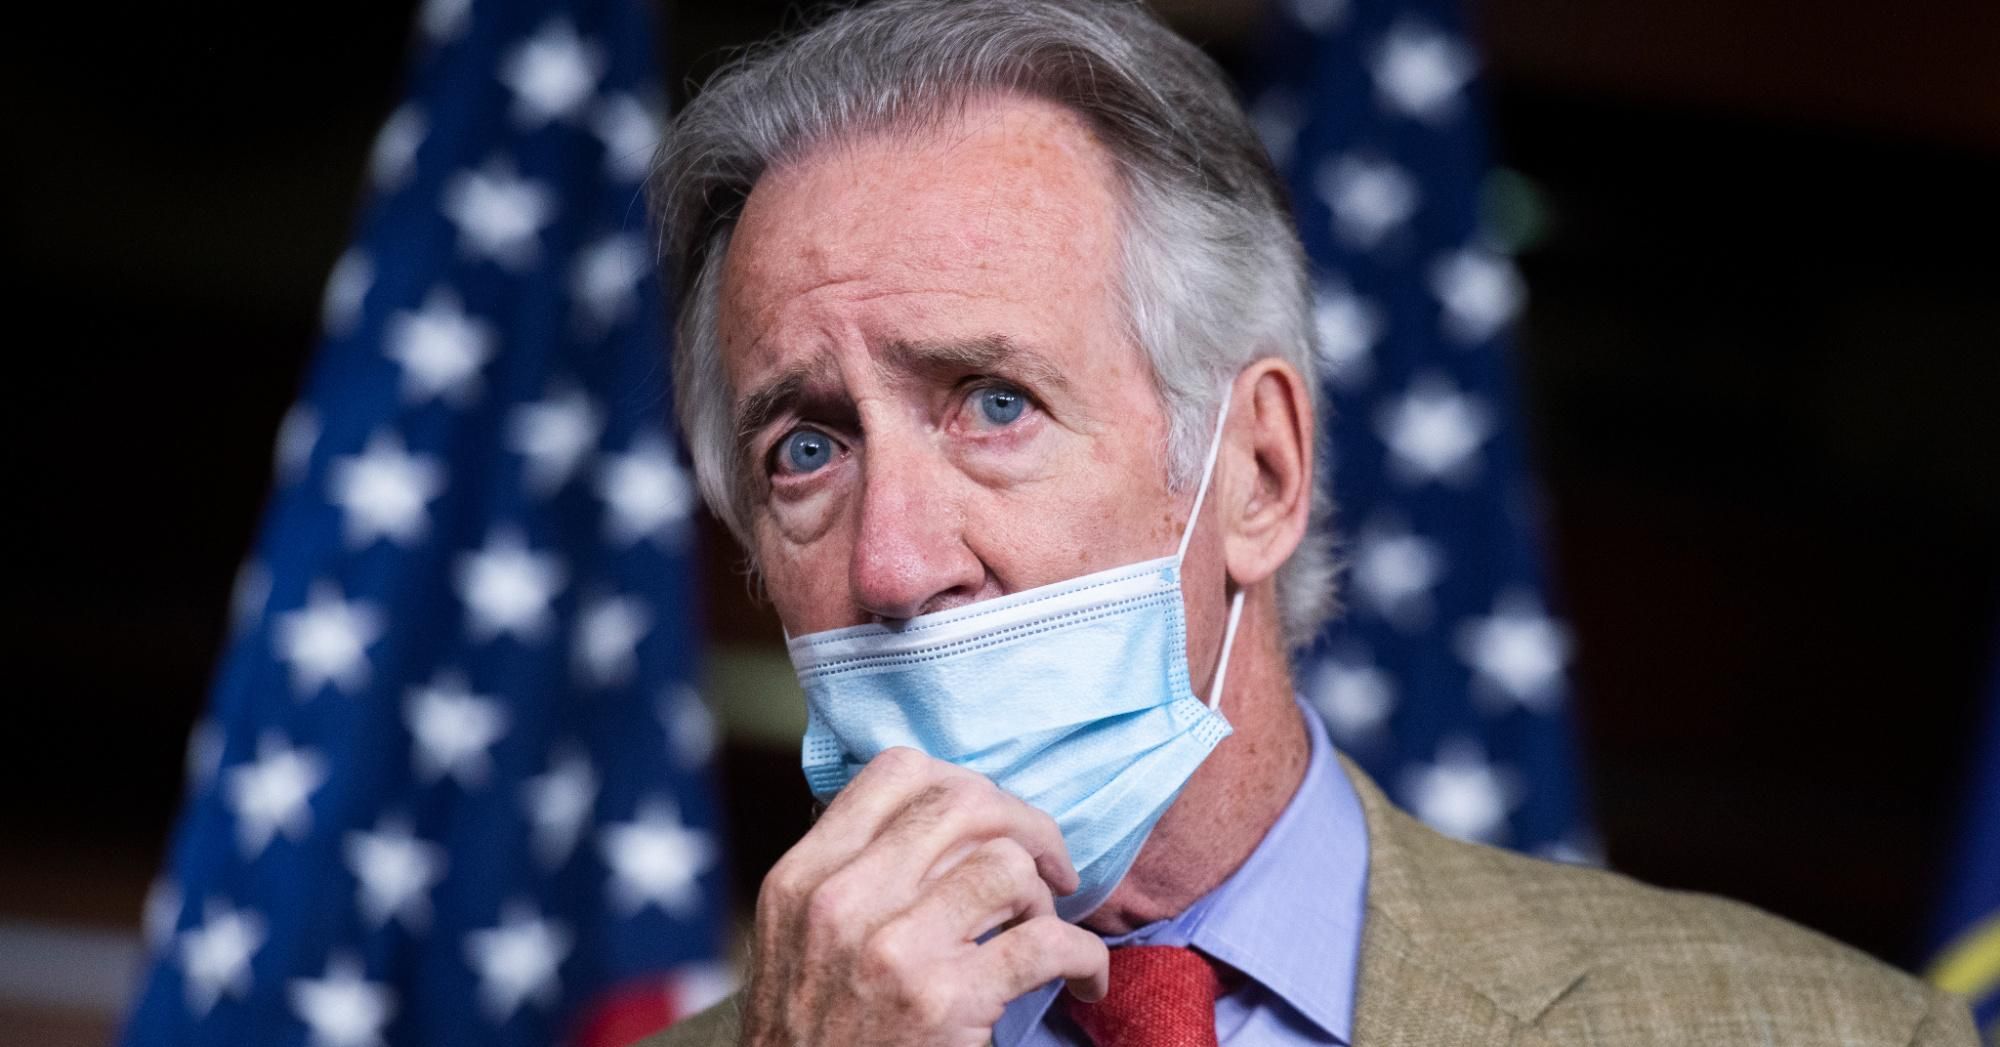 Rep. Richard Neal (D-Mass.) speaks during a news conference in the Capitol Visitor Center on Friday, July 24, 2020.